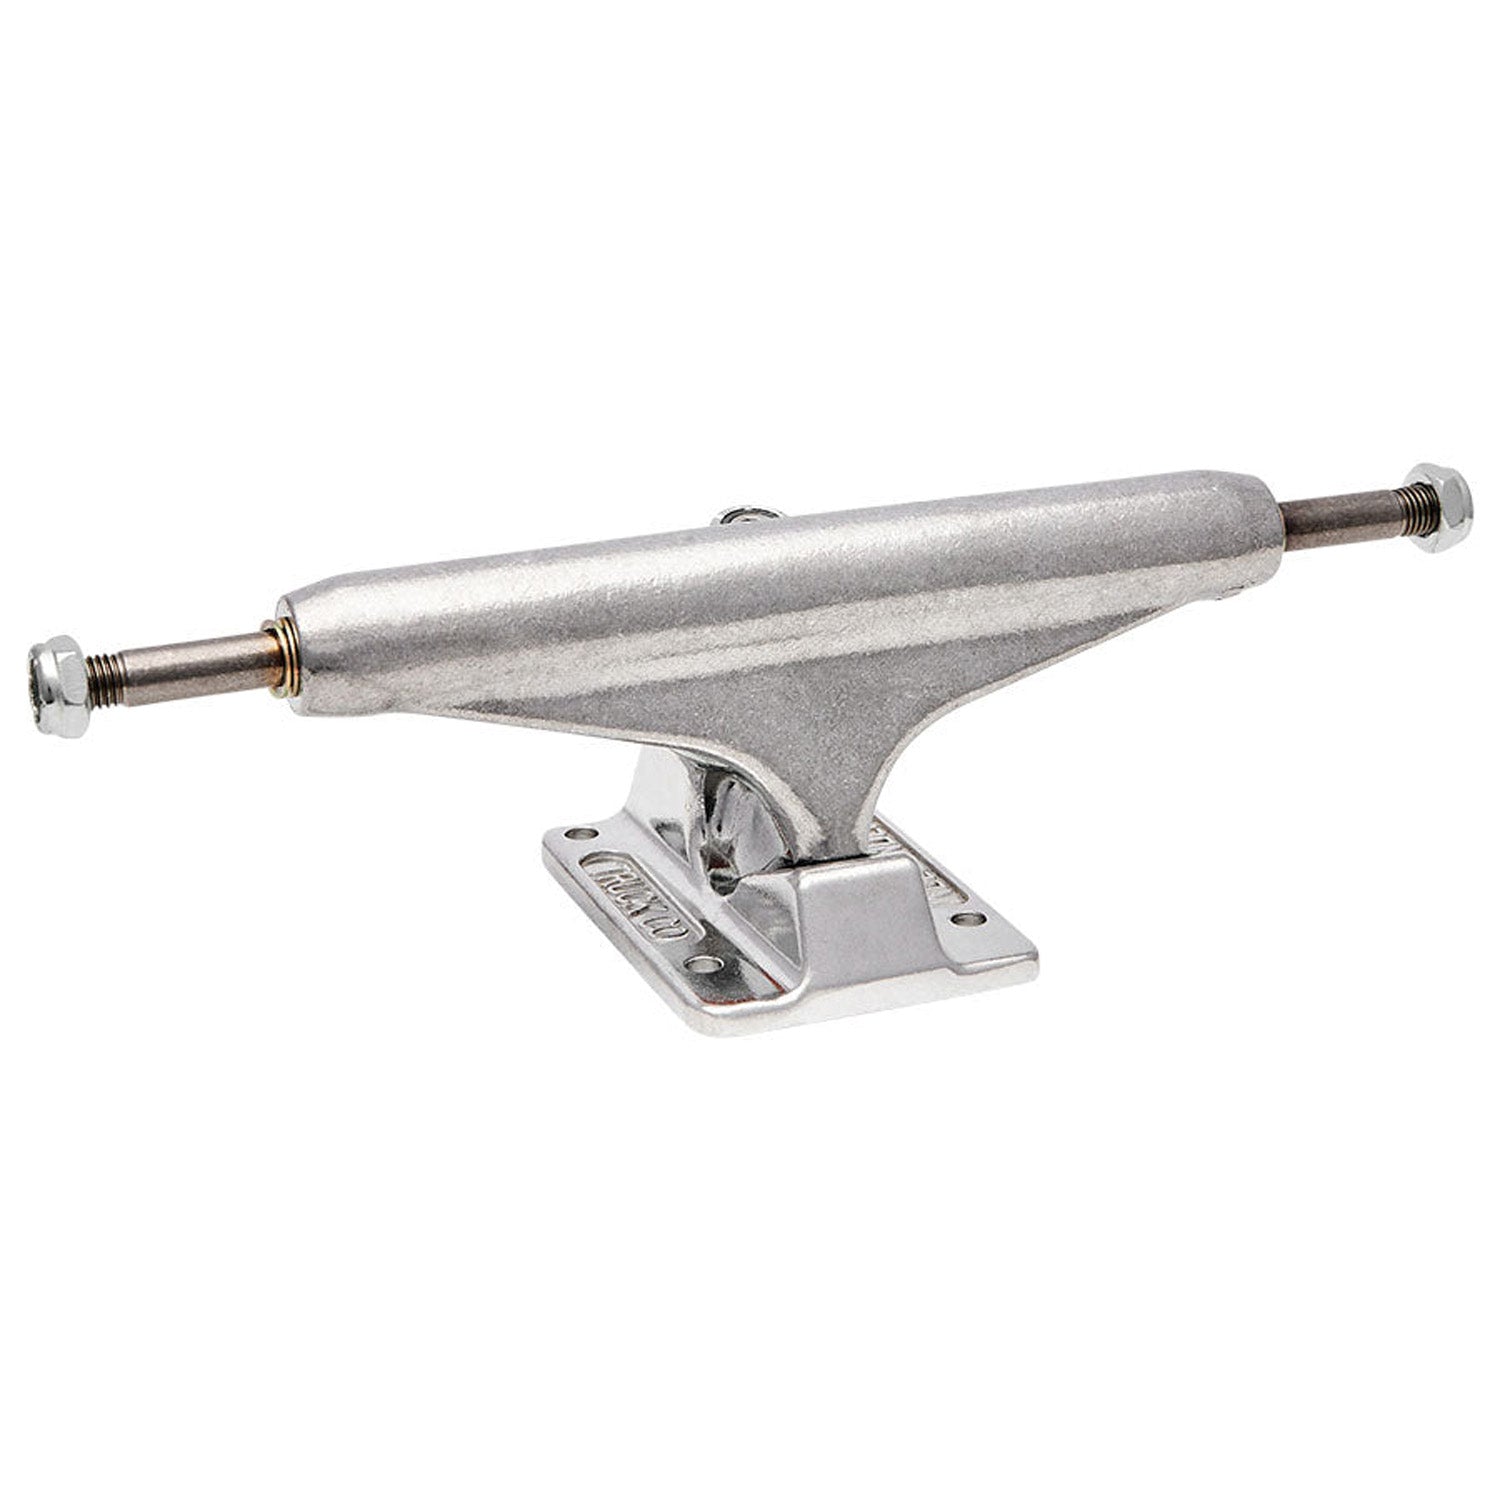 Independent Stage 11 Forged Titanium Silver Trucks (Sold As A Single Truck)